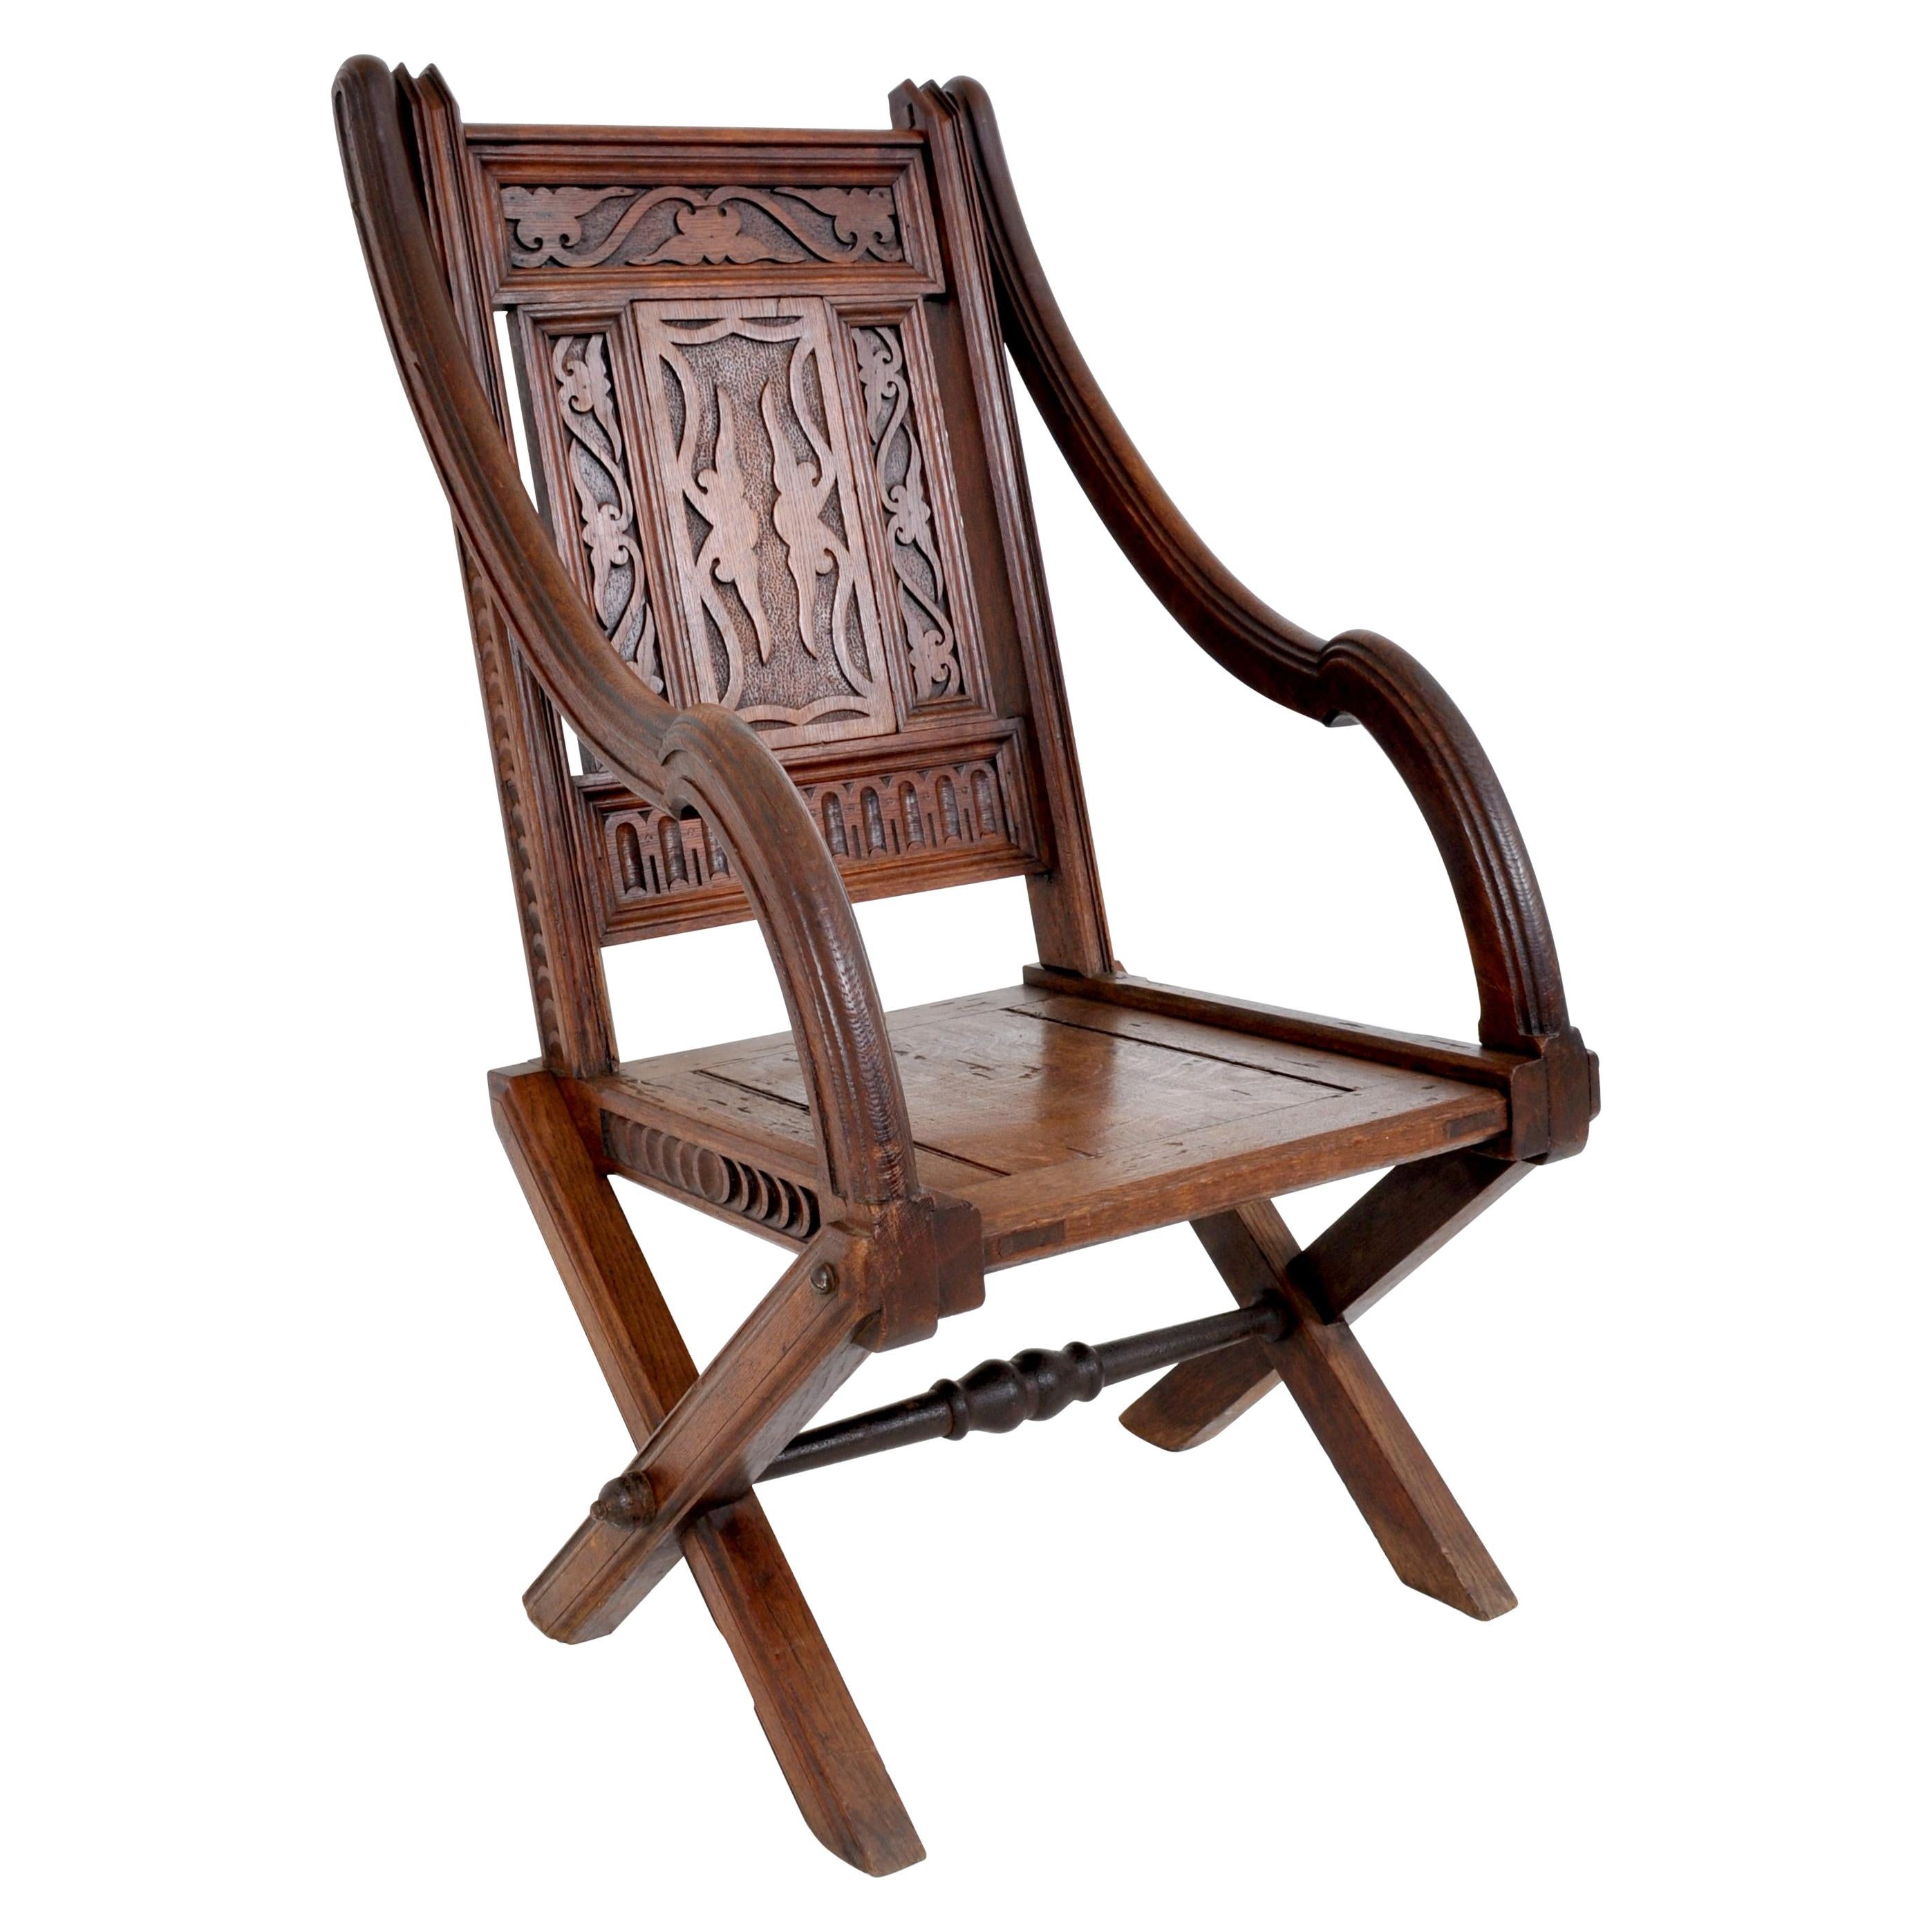 Carved English Gothic Revival Bishop's Throne Chair, A. W. Pugin, circa 1855